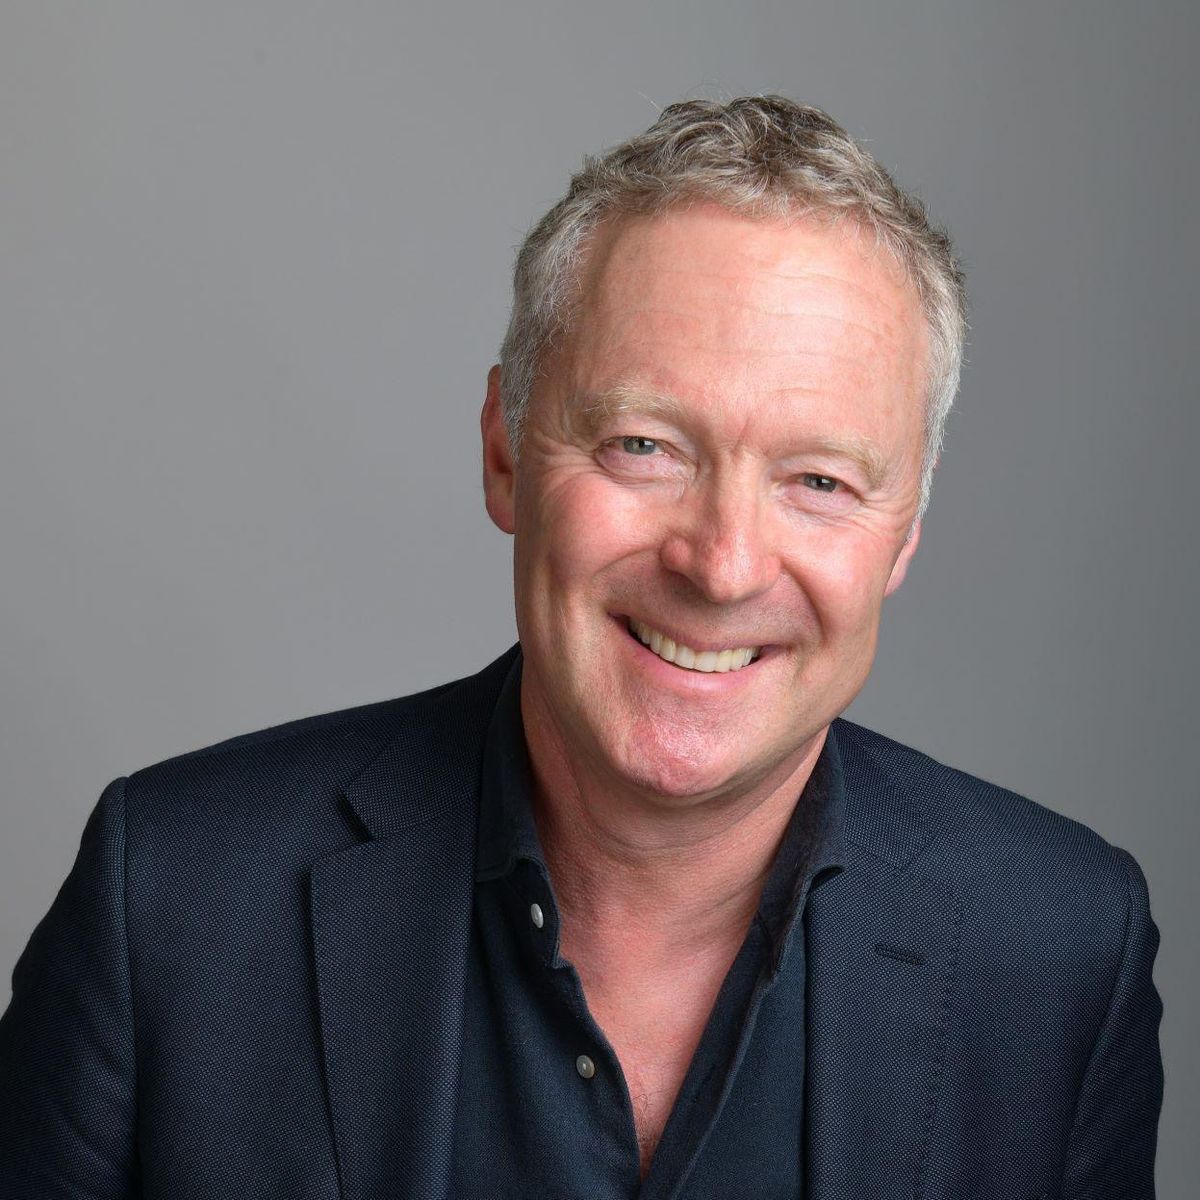 An Evening with Rory Bremner, hosted by Fred MacAulay